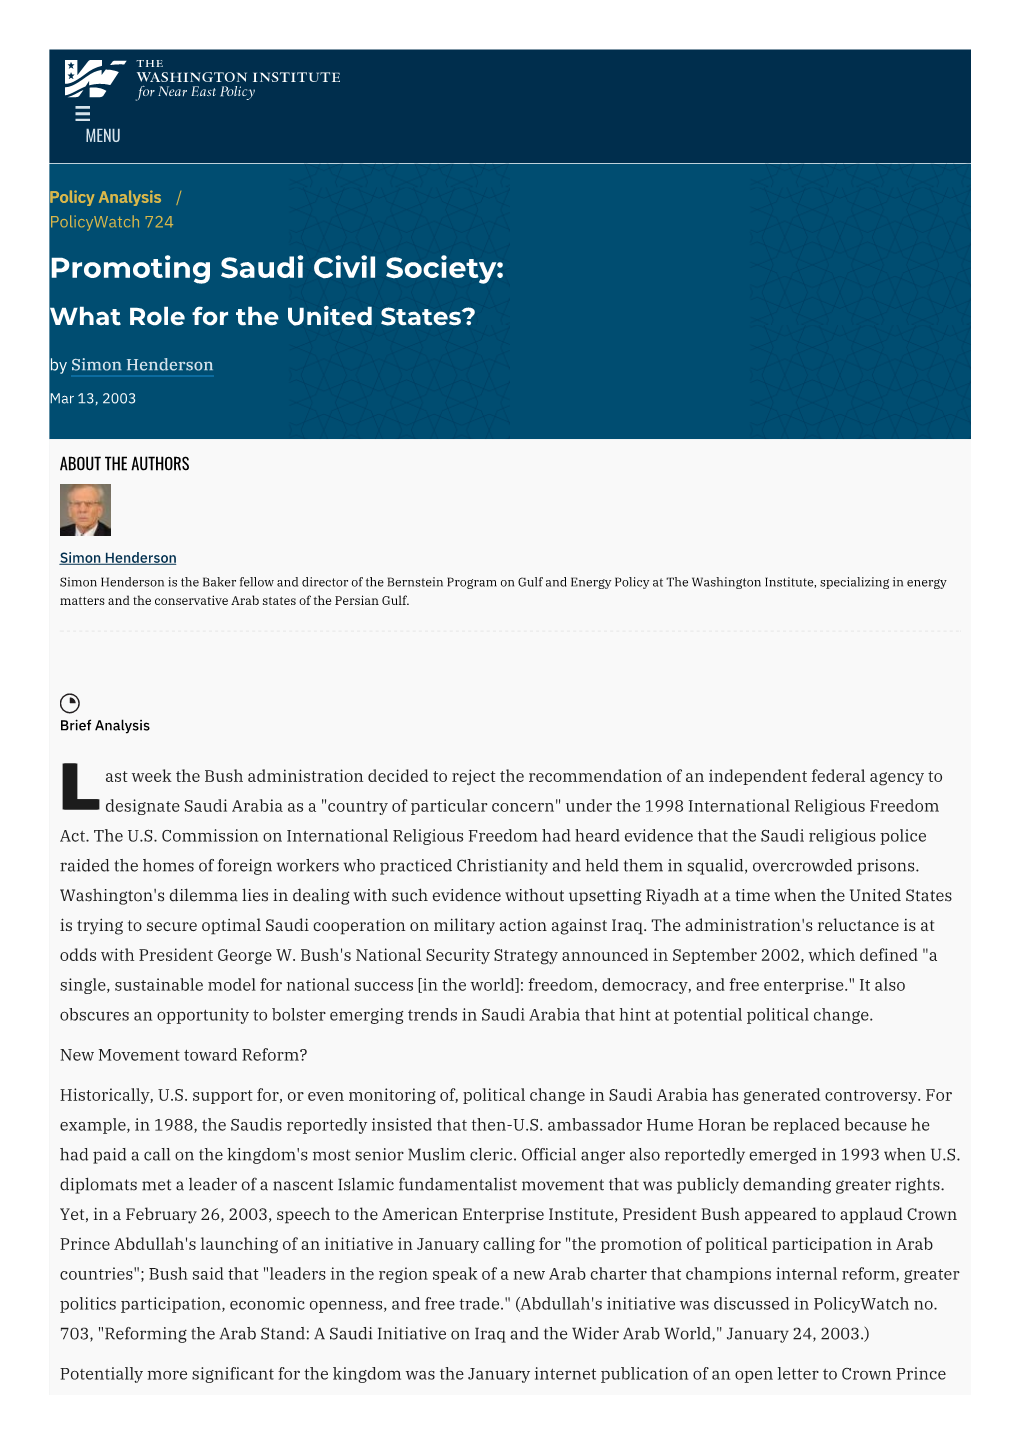 Promoting Saudi Civil Society: What Role for the United States? by Simon Henderson